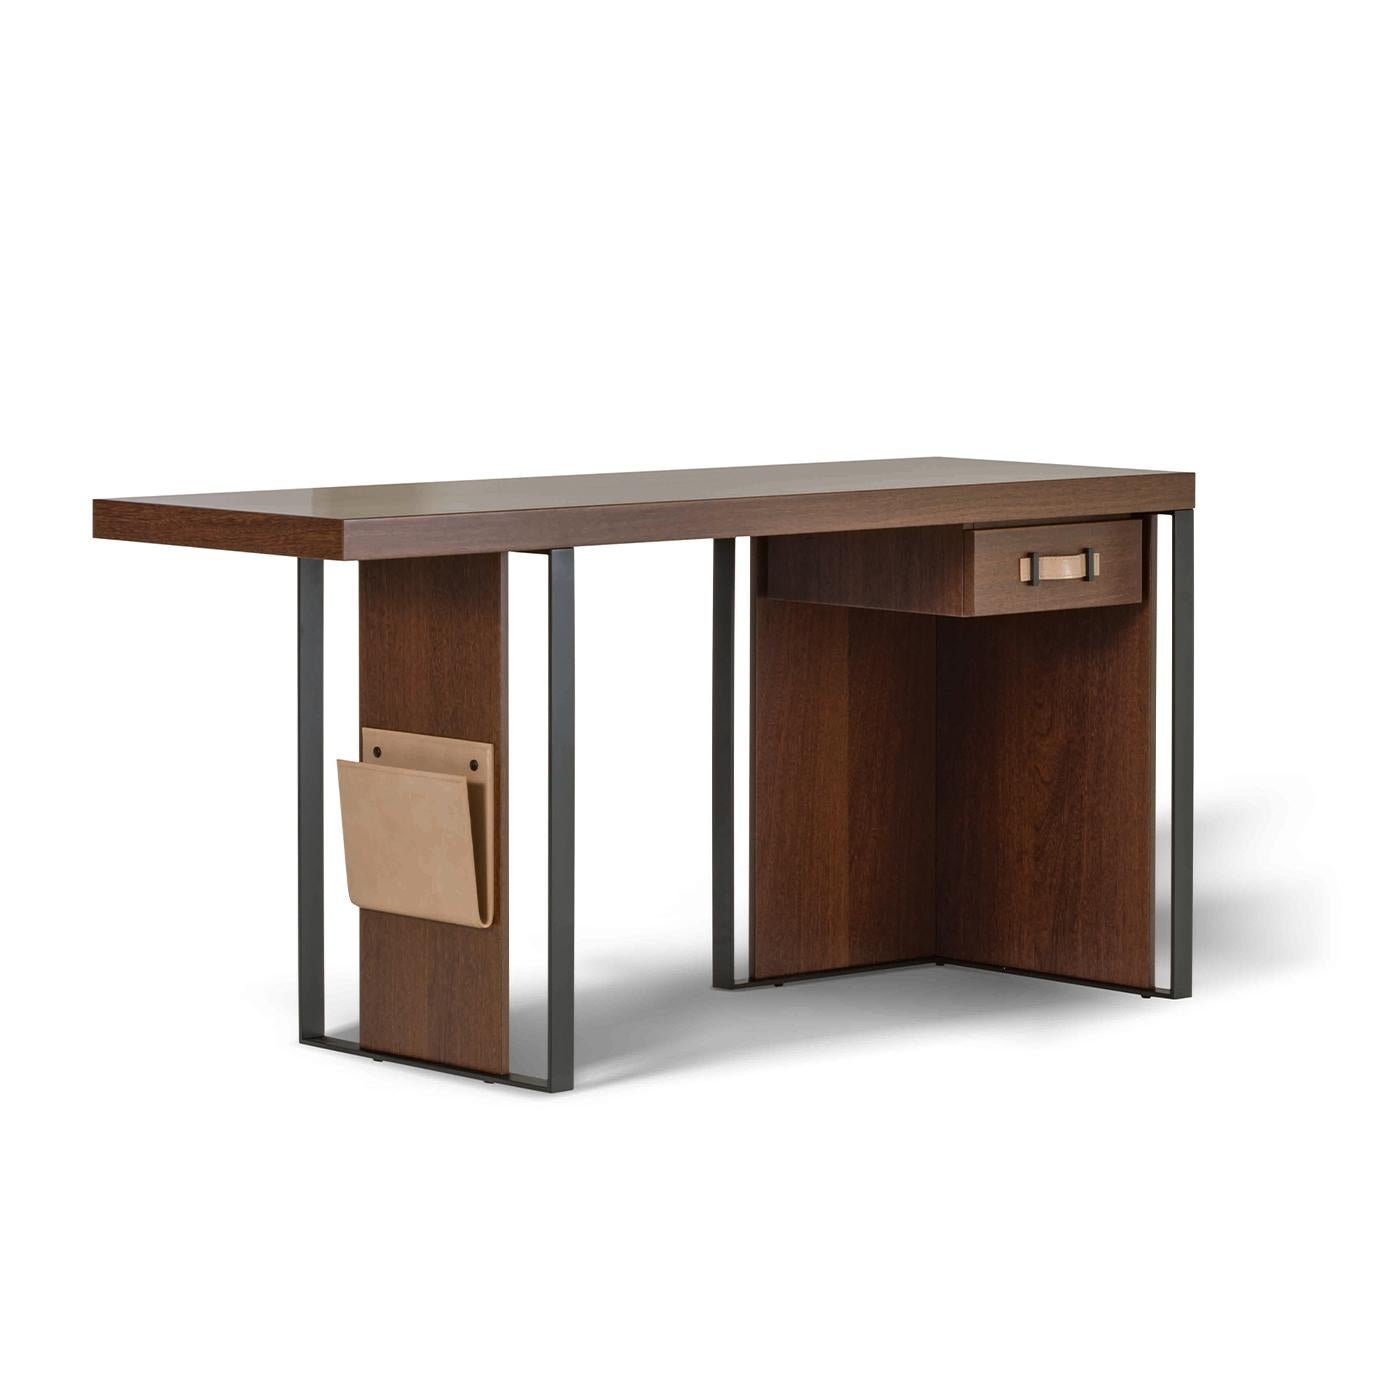 In this superb desk, neat and sharp lines are meant to enhance its luxury details. The asymmetrical frame blends black-varnished metal profiles with bold components in honey-hued walnut wood as the sturdy, rectangular top and the right column